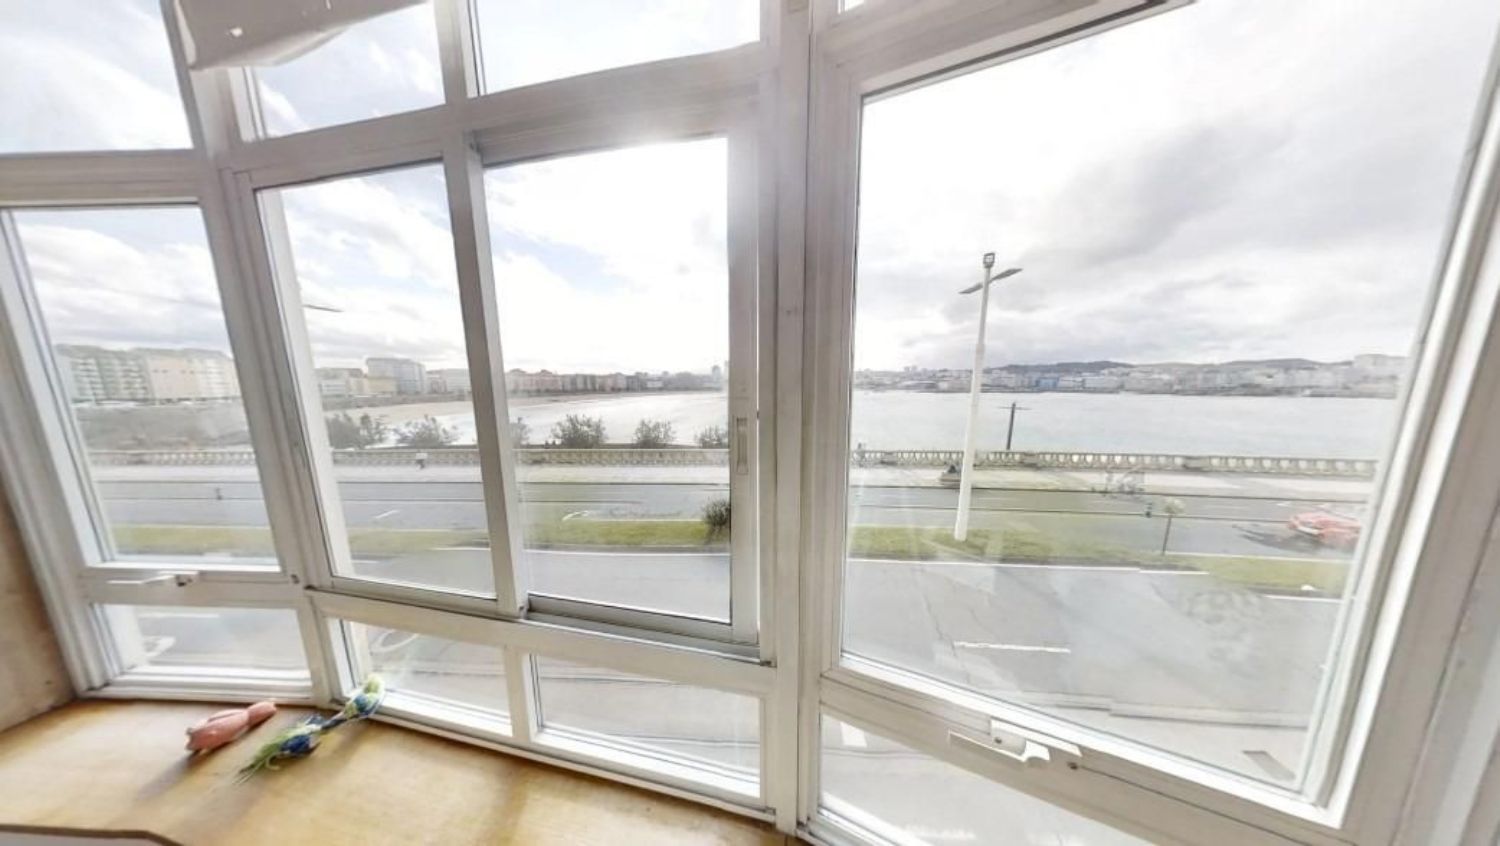 Apartment for sale on the seafront on Calle Matadero, in A Coruña